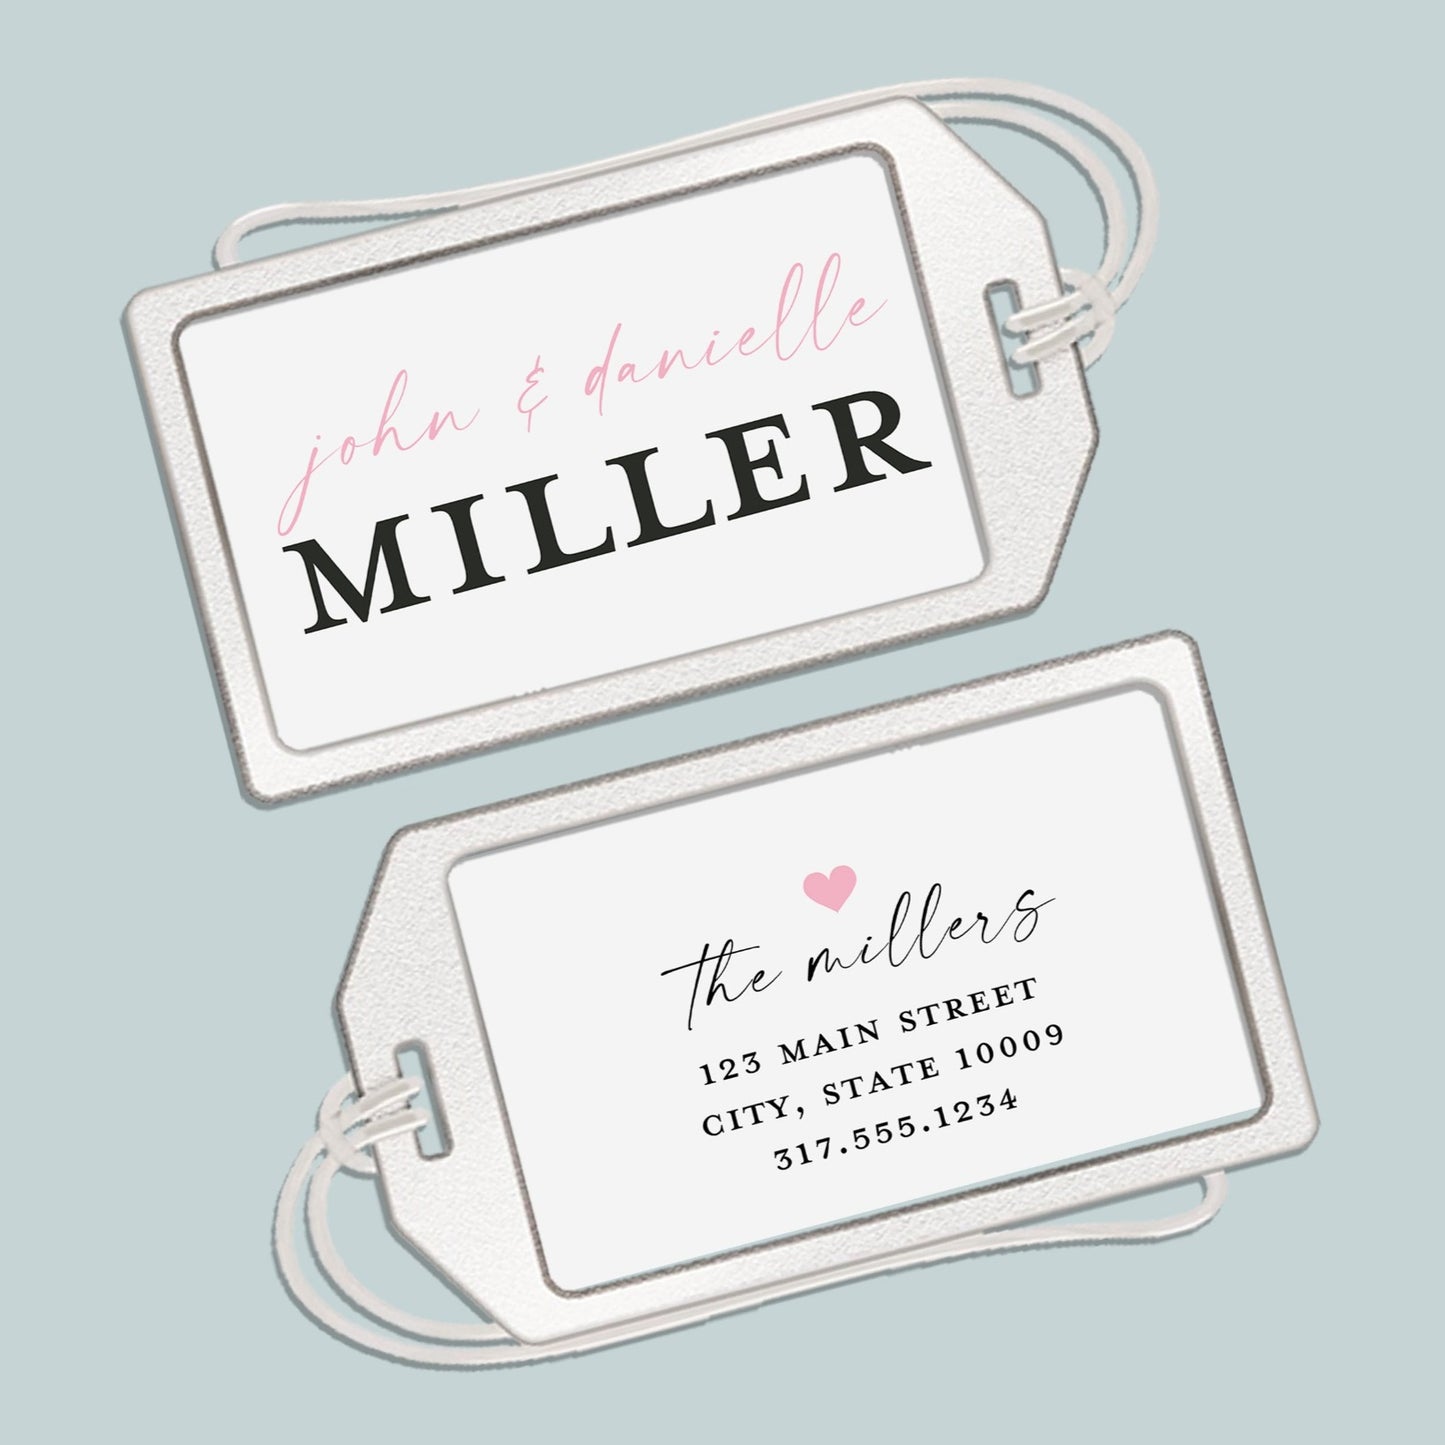 Newlyweds Personalized Acrylic Luggage Tag with Loop - Personalized ID Tag